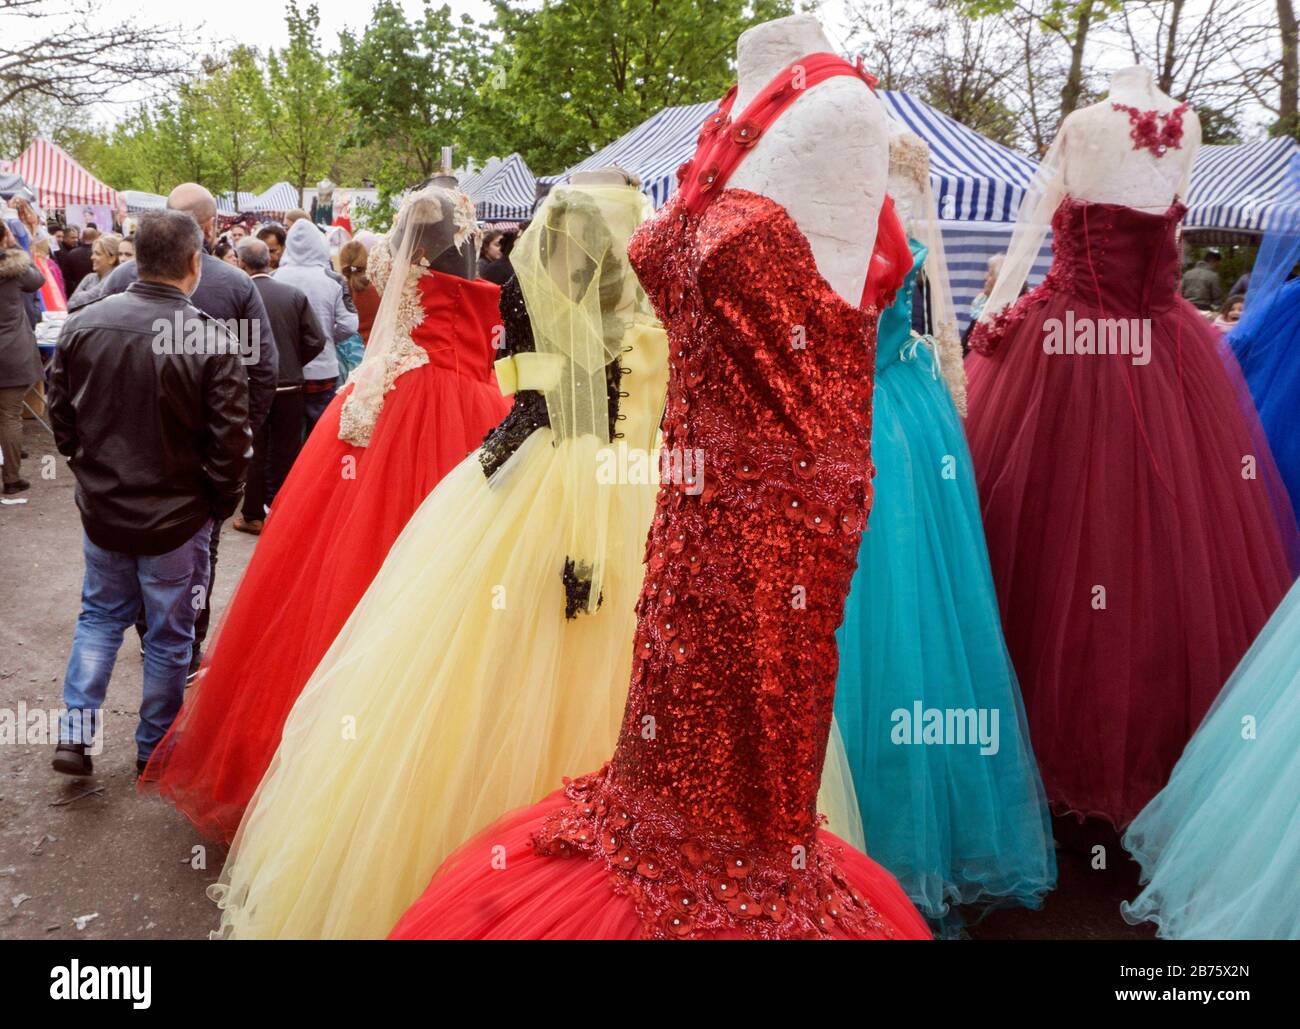 Stand with Turkish wedding dresses on a flea market in Gelsenkirchen, on 22.04.2017. With an unemployment rate of 14% (January 2017) and a foreigner share of almost 20%, the city of Gelsenkirchen is facing great social problems. [automated translation] Stock Photo